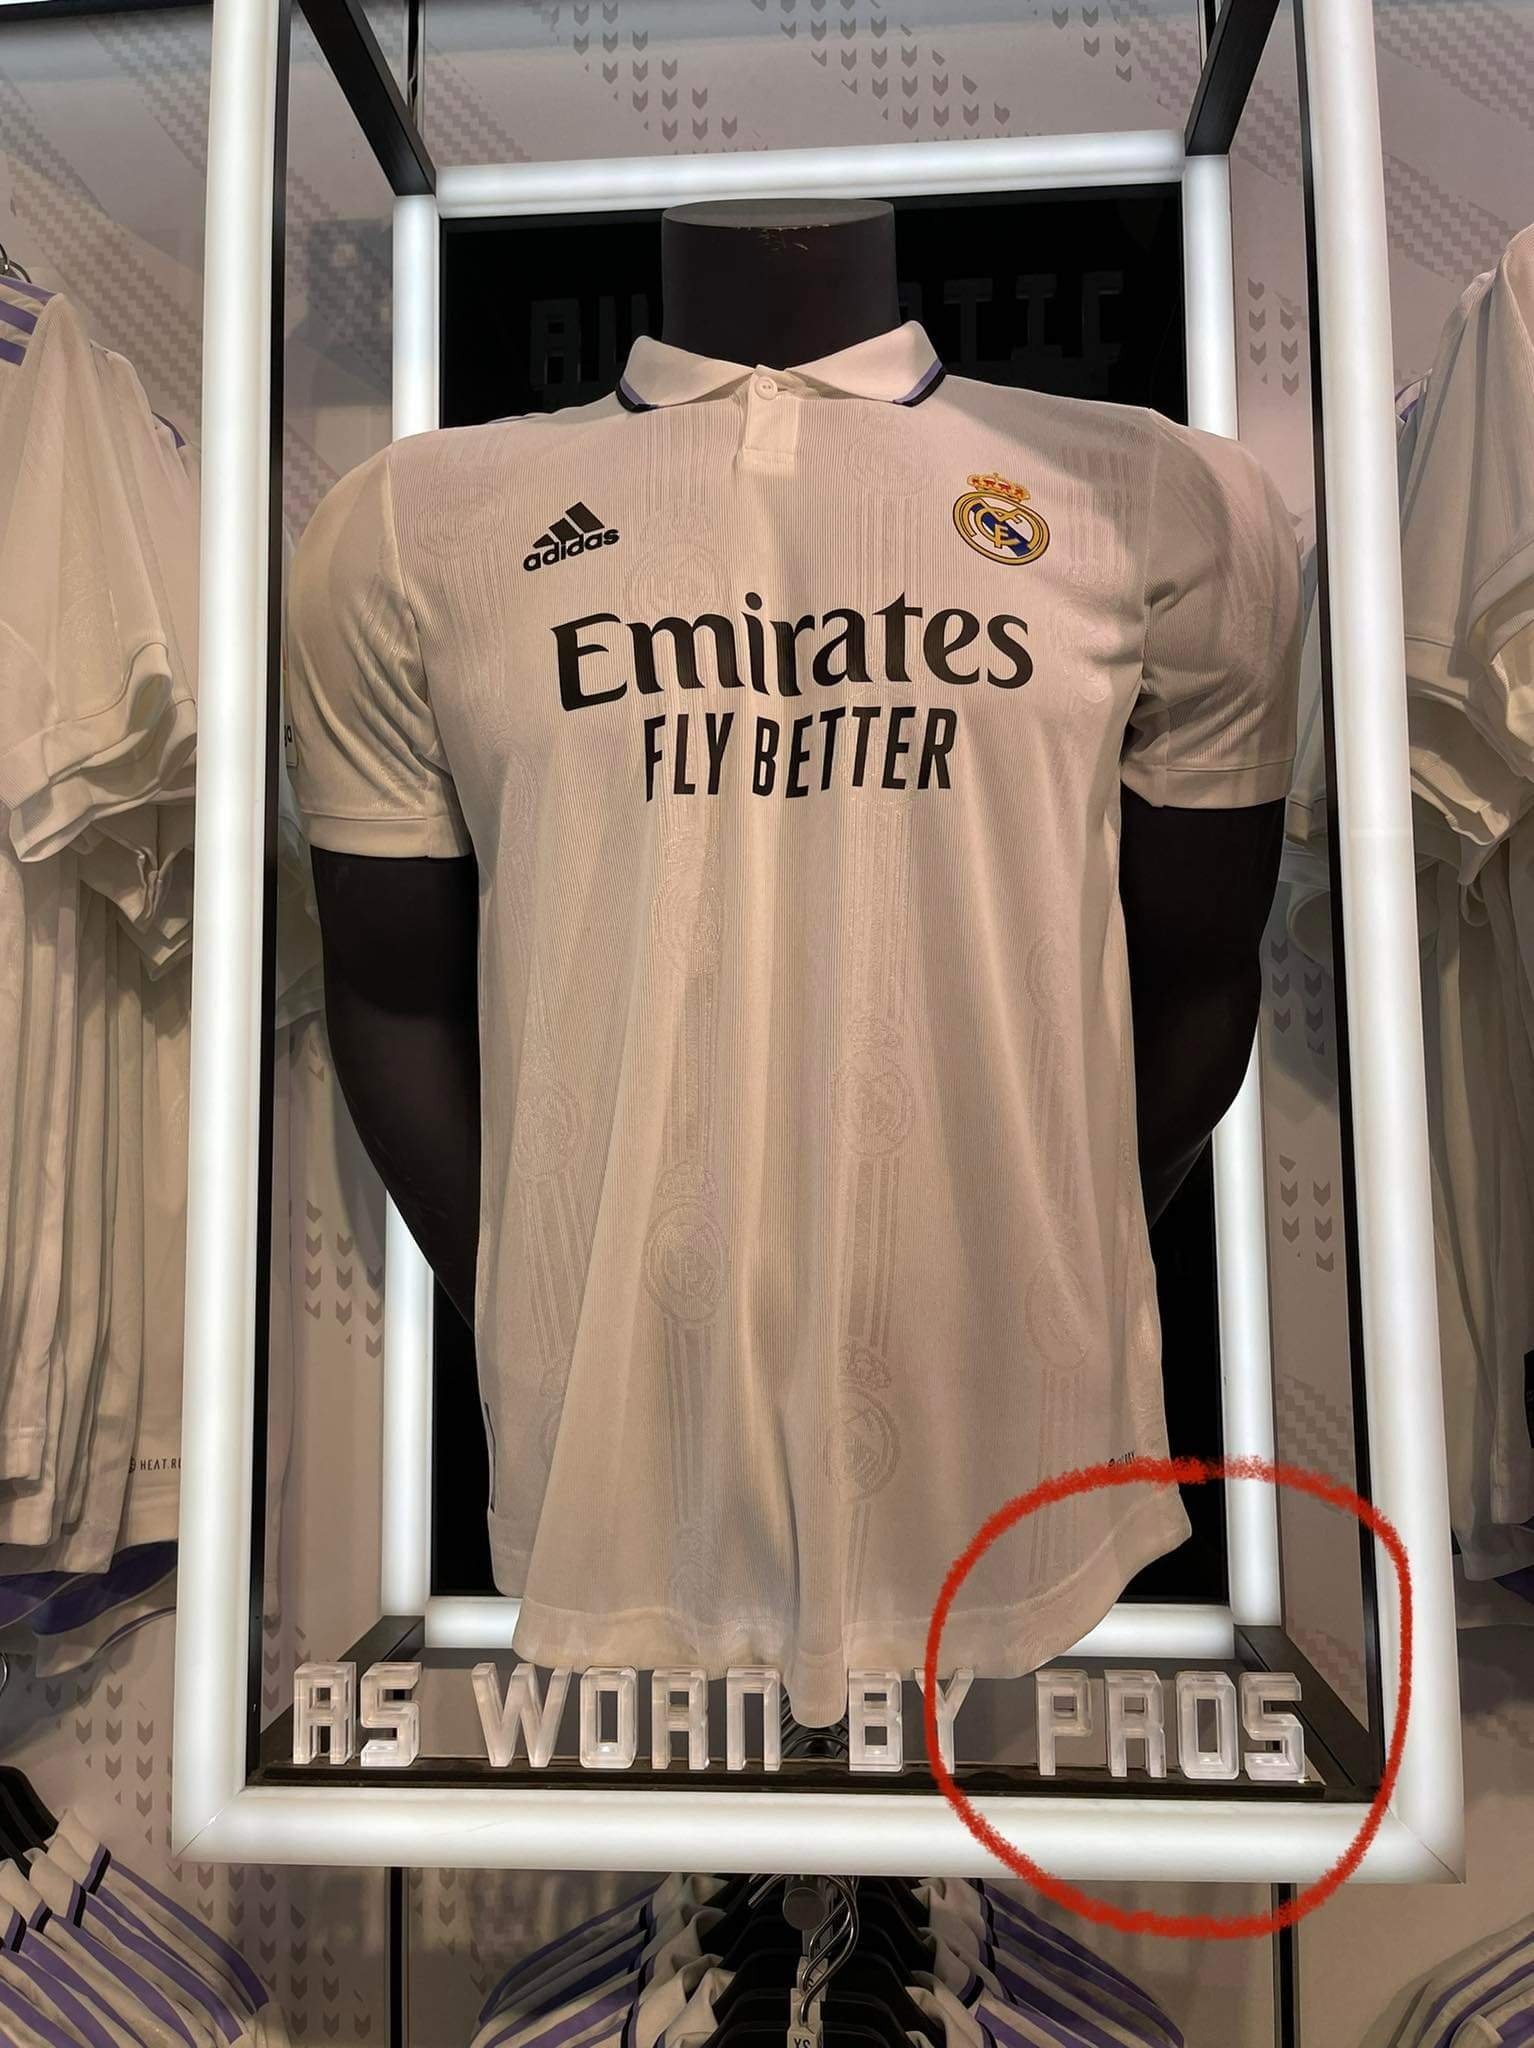 Meanwhile, in the official Madrid store in Madrid ...